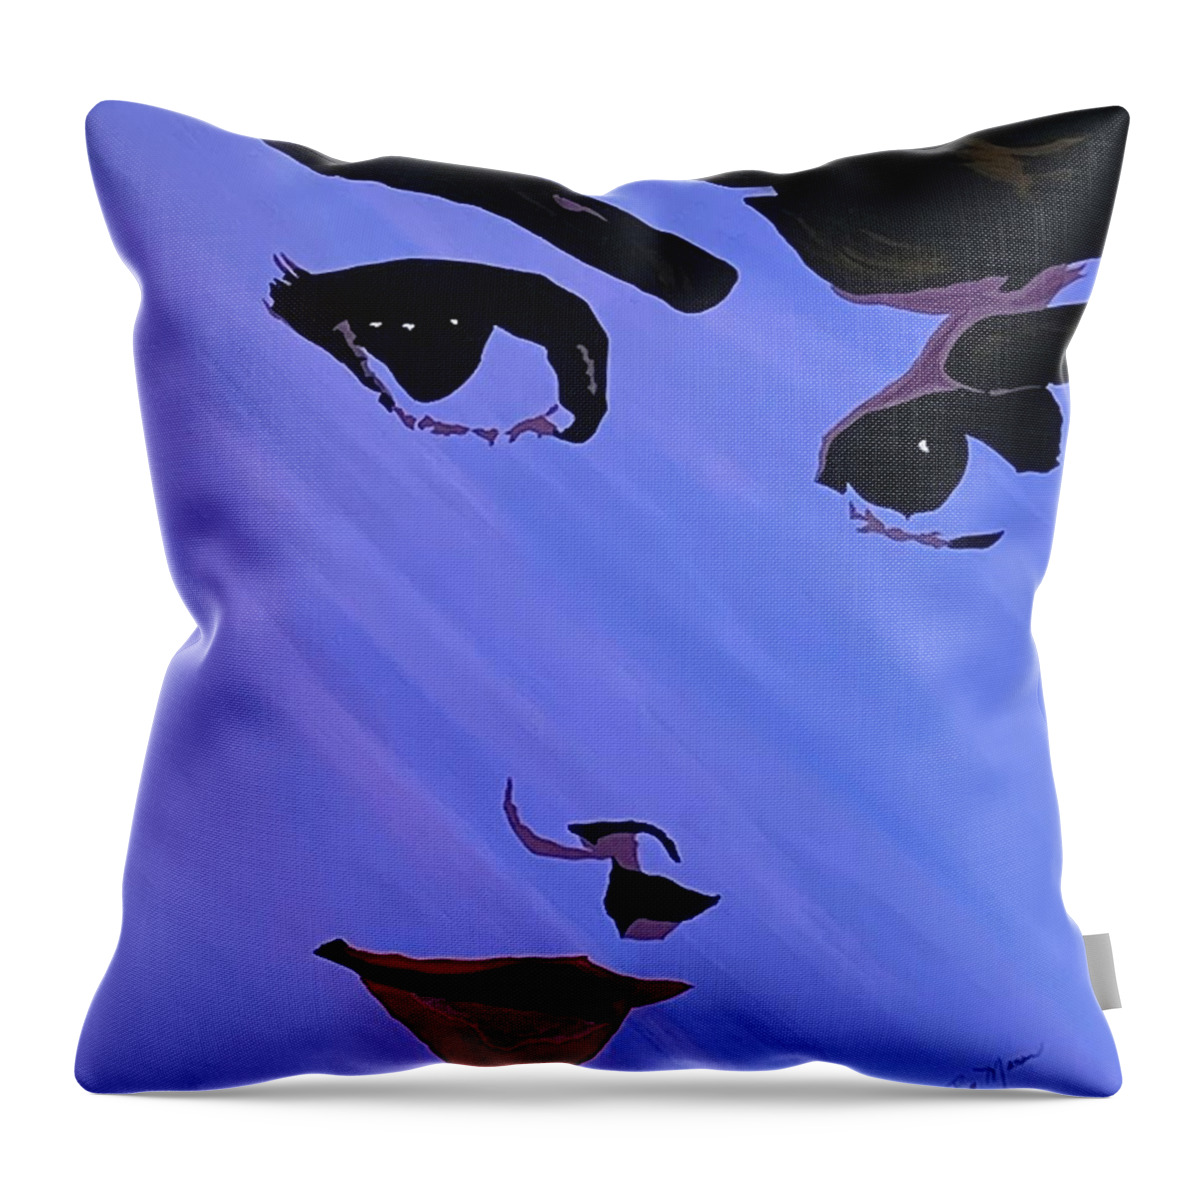  Throw Pillow featuring the painting Audrey Hepburn by Bill Manson